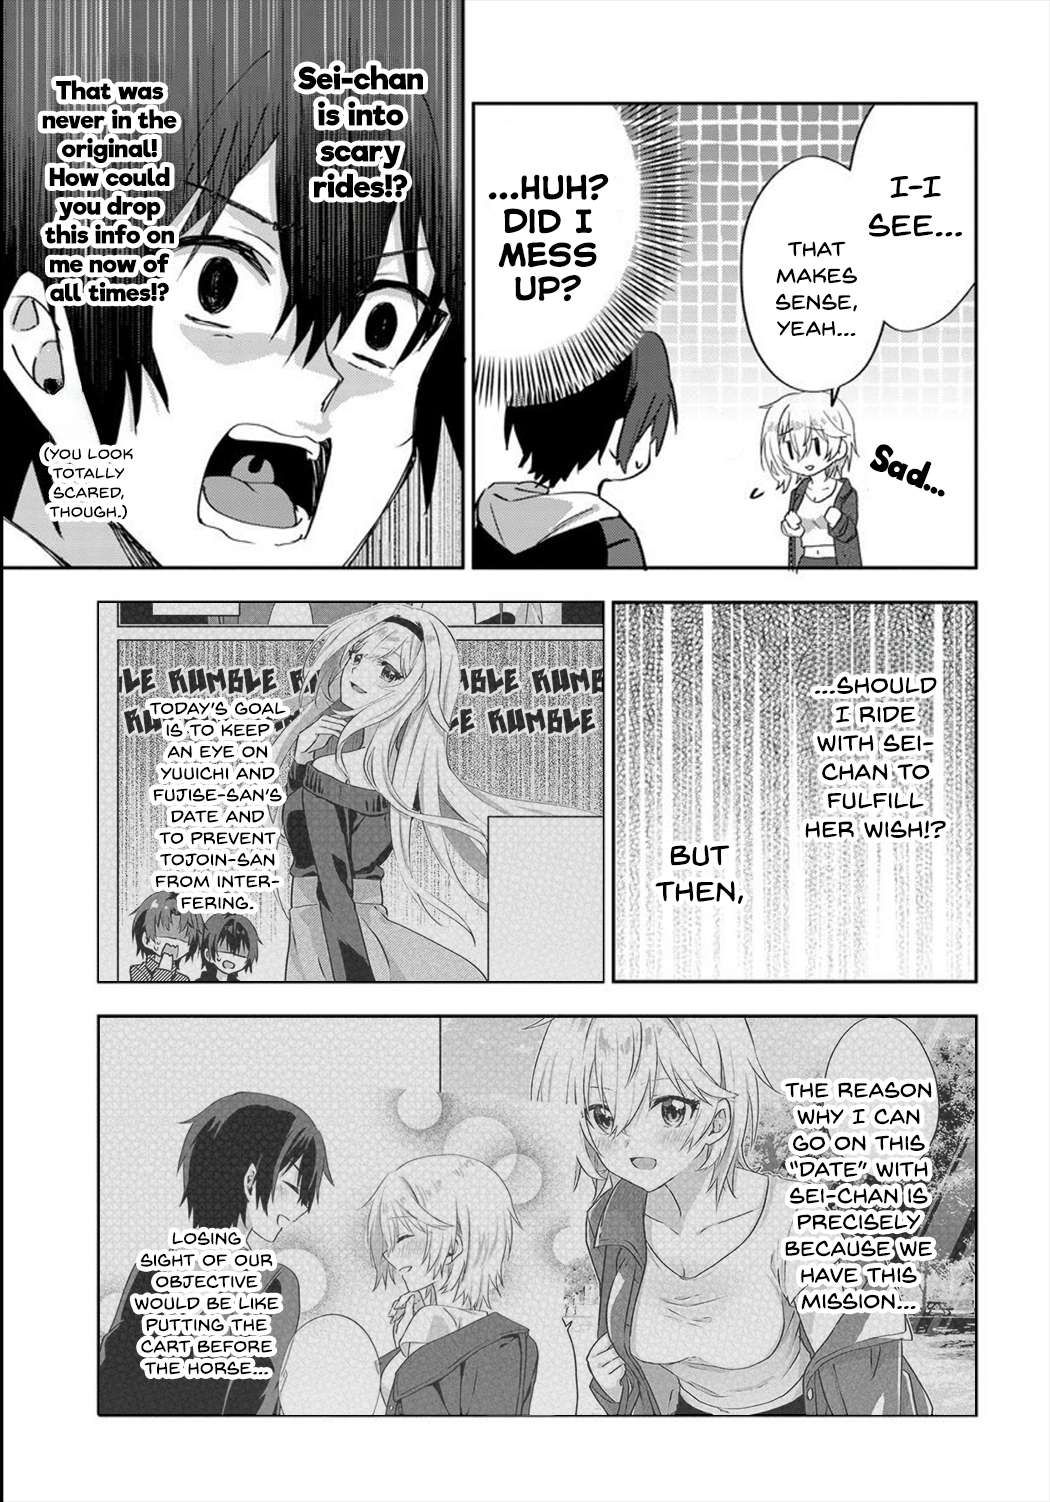 Since I’ve Entered the World of Romantic Comedy Manga, I’ll Do My Best to Make the Losing Heroine Happy. - chapter 7.1 - #3